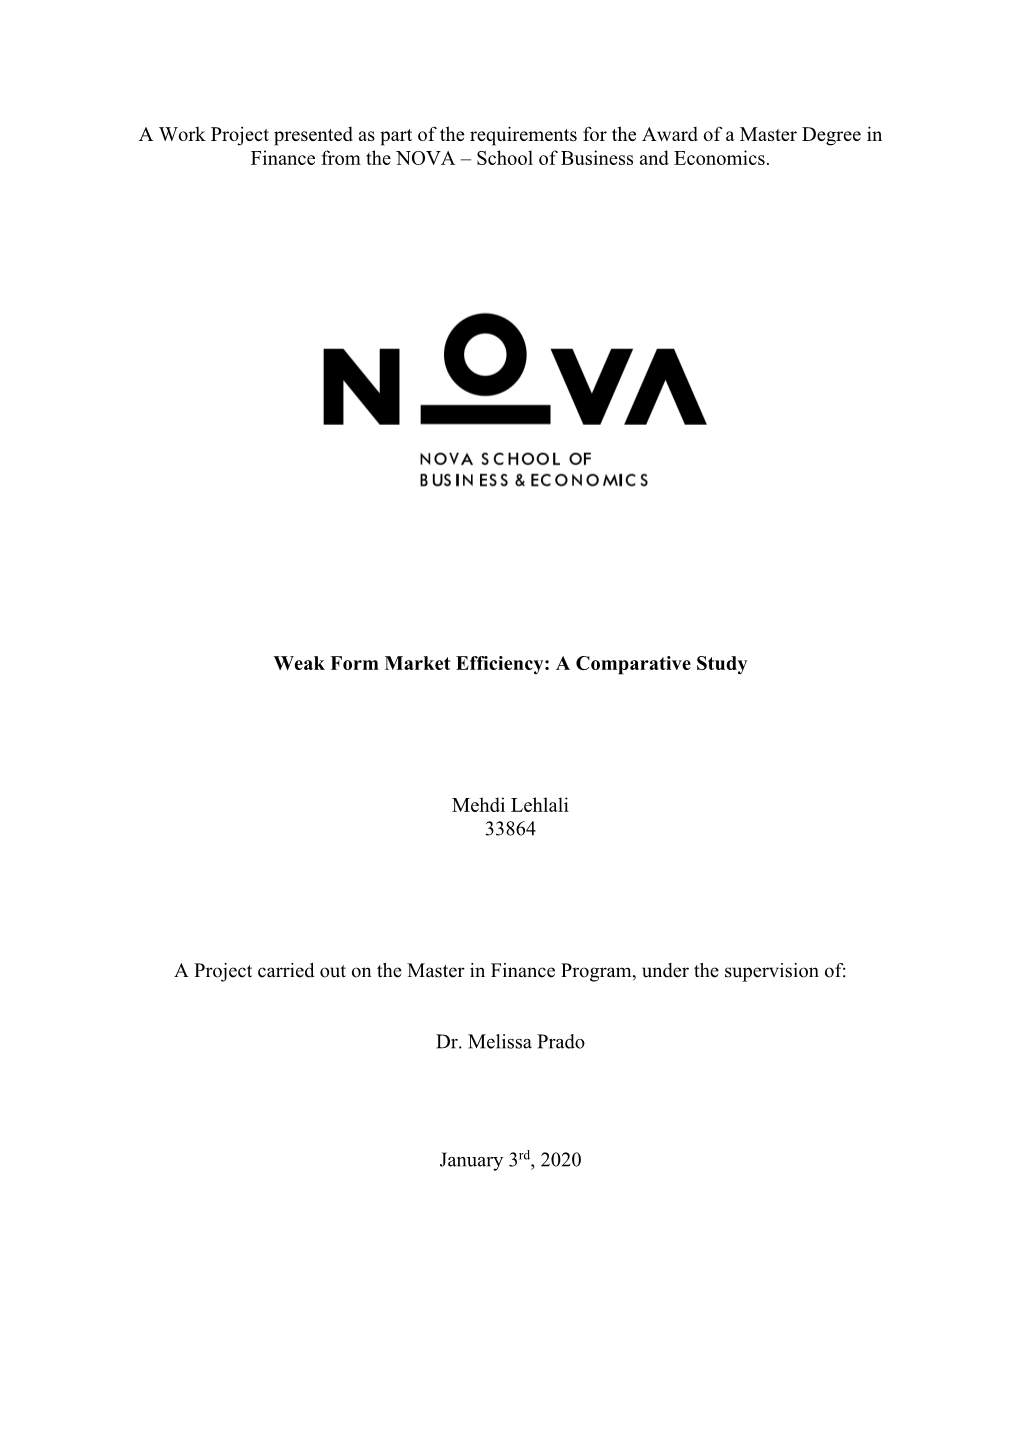 A Work Project Presented As Part of the Requirements for the Award of a Master Degree in Finance from the NOVA – School of Business and Economics